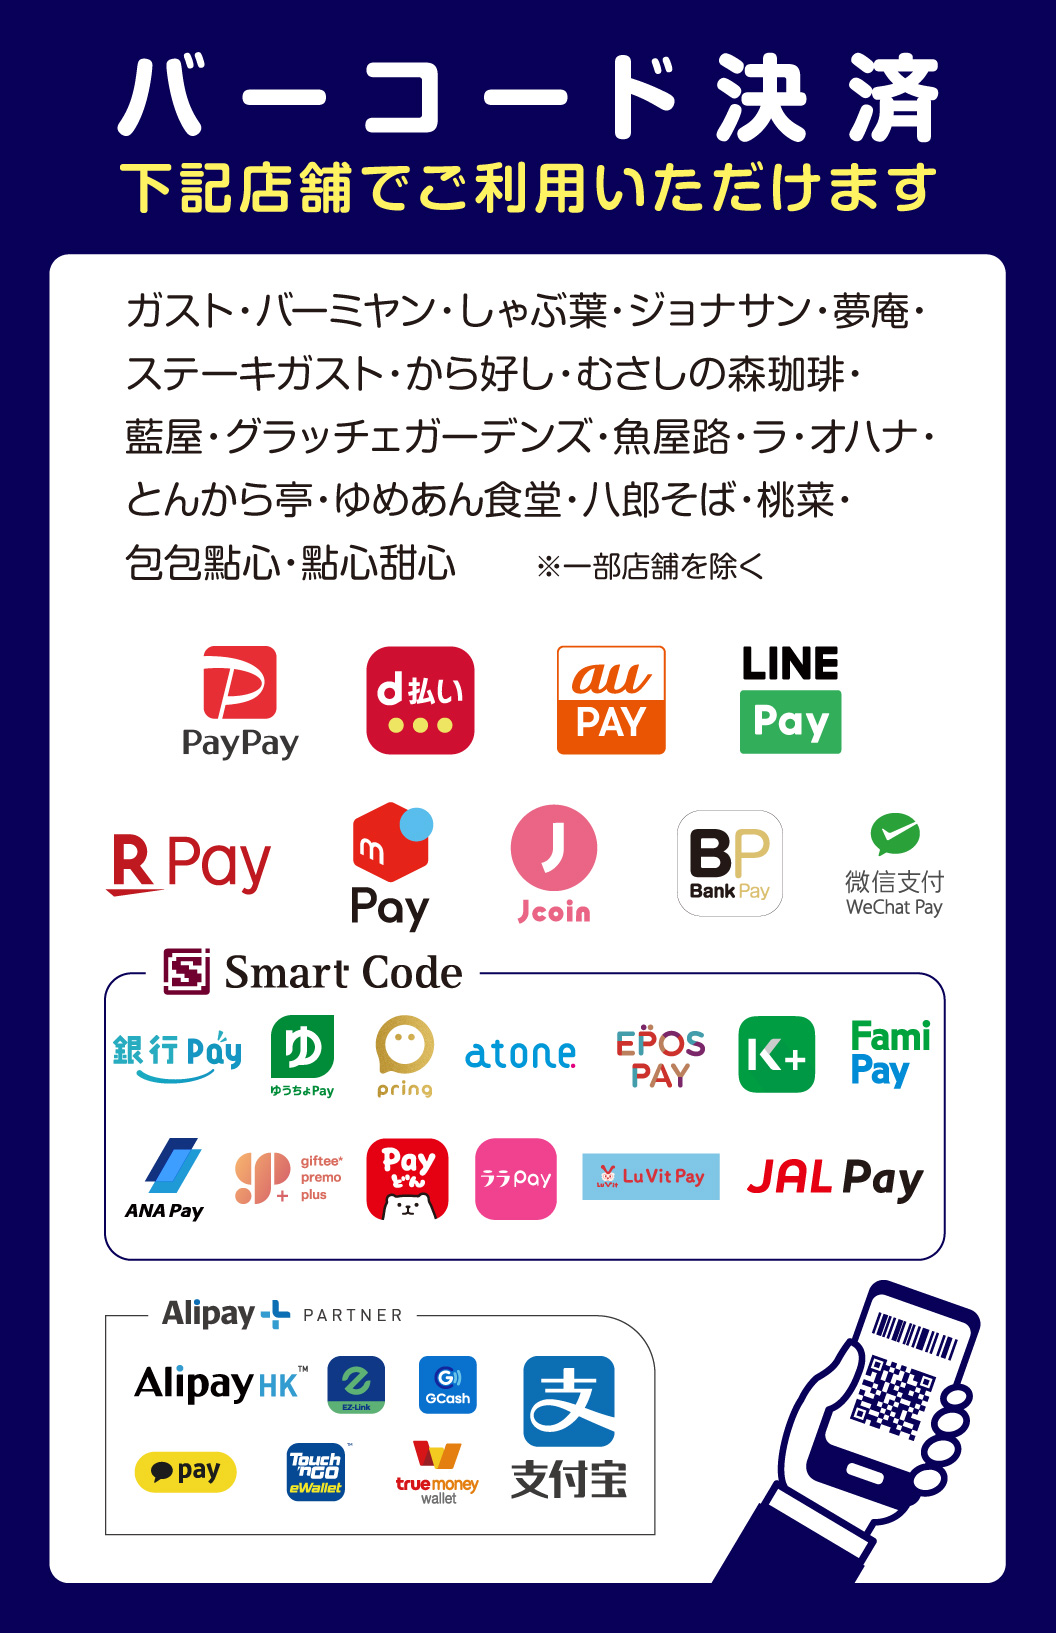 Store limited, you can use QR code payment.